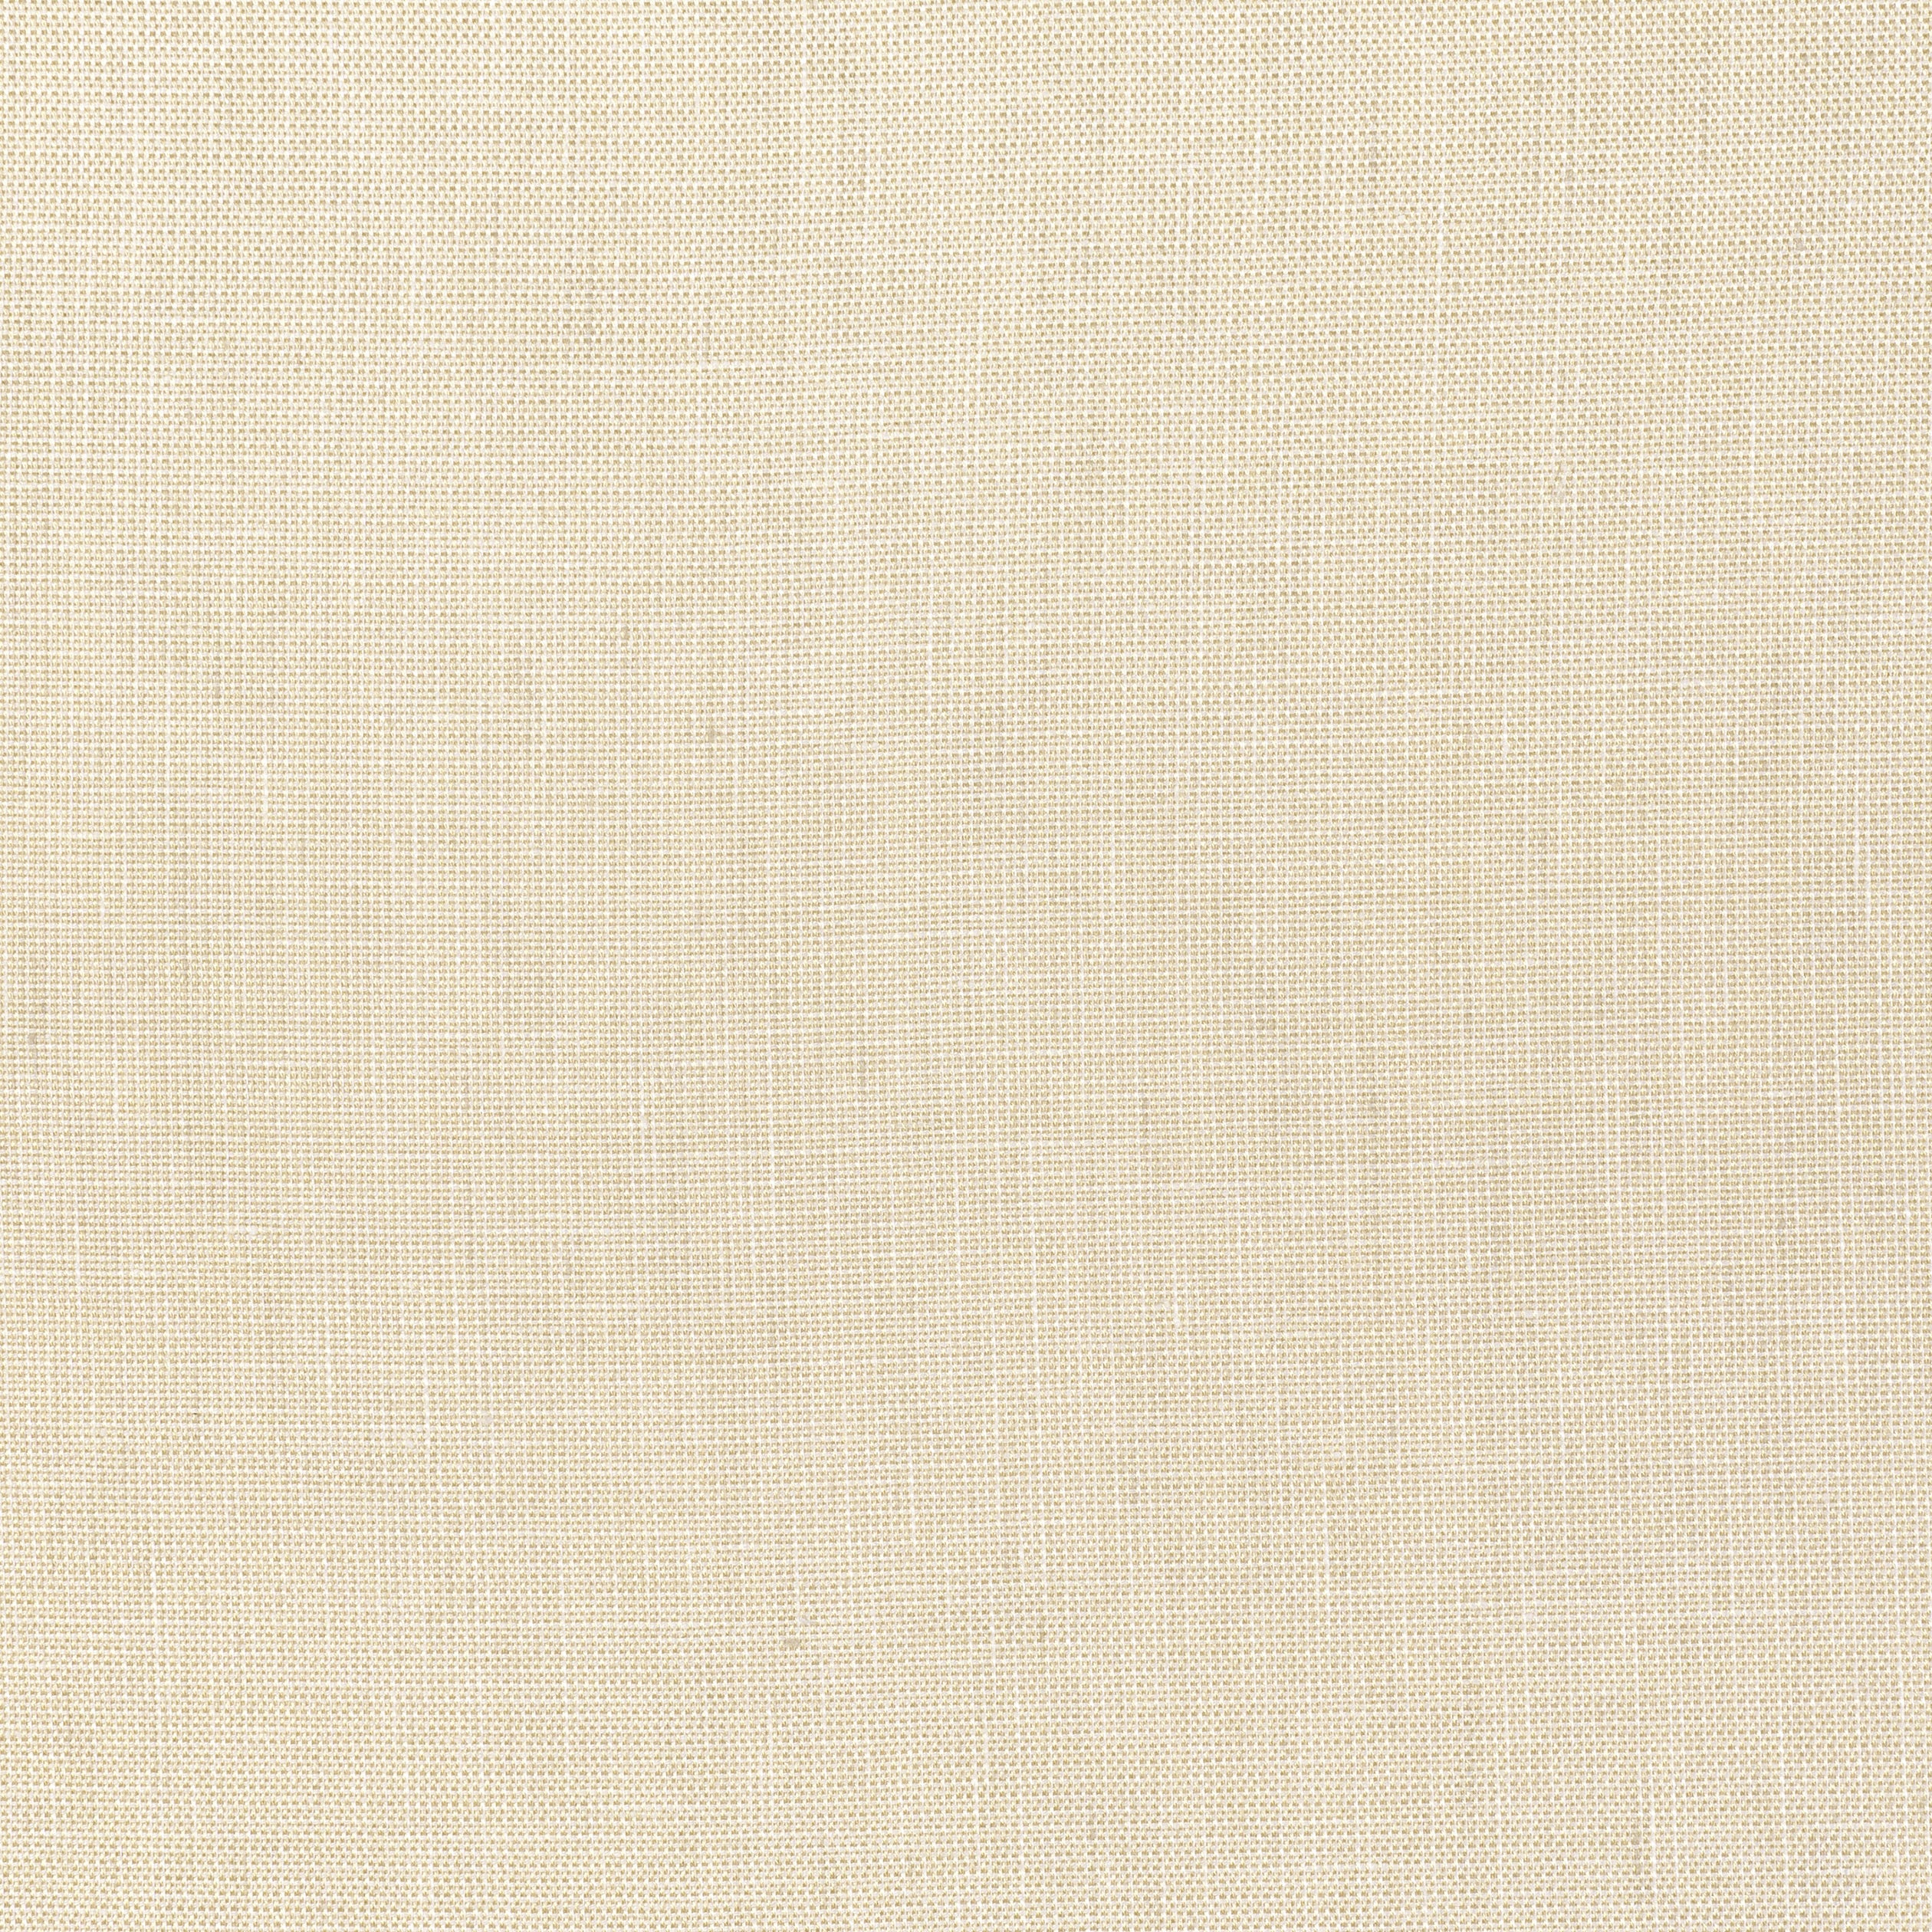 Skye Linen fabric in cashmere color - pattern number FWW7607 - by Thibaut in the Palisades collection